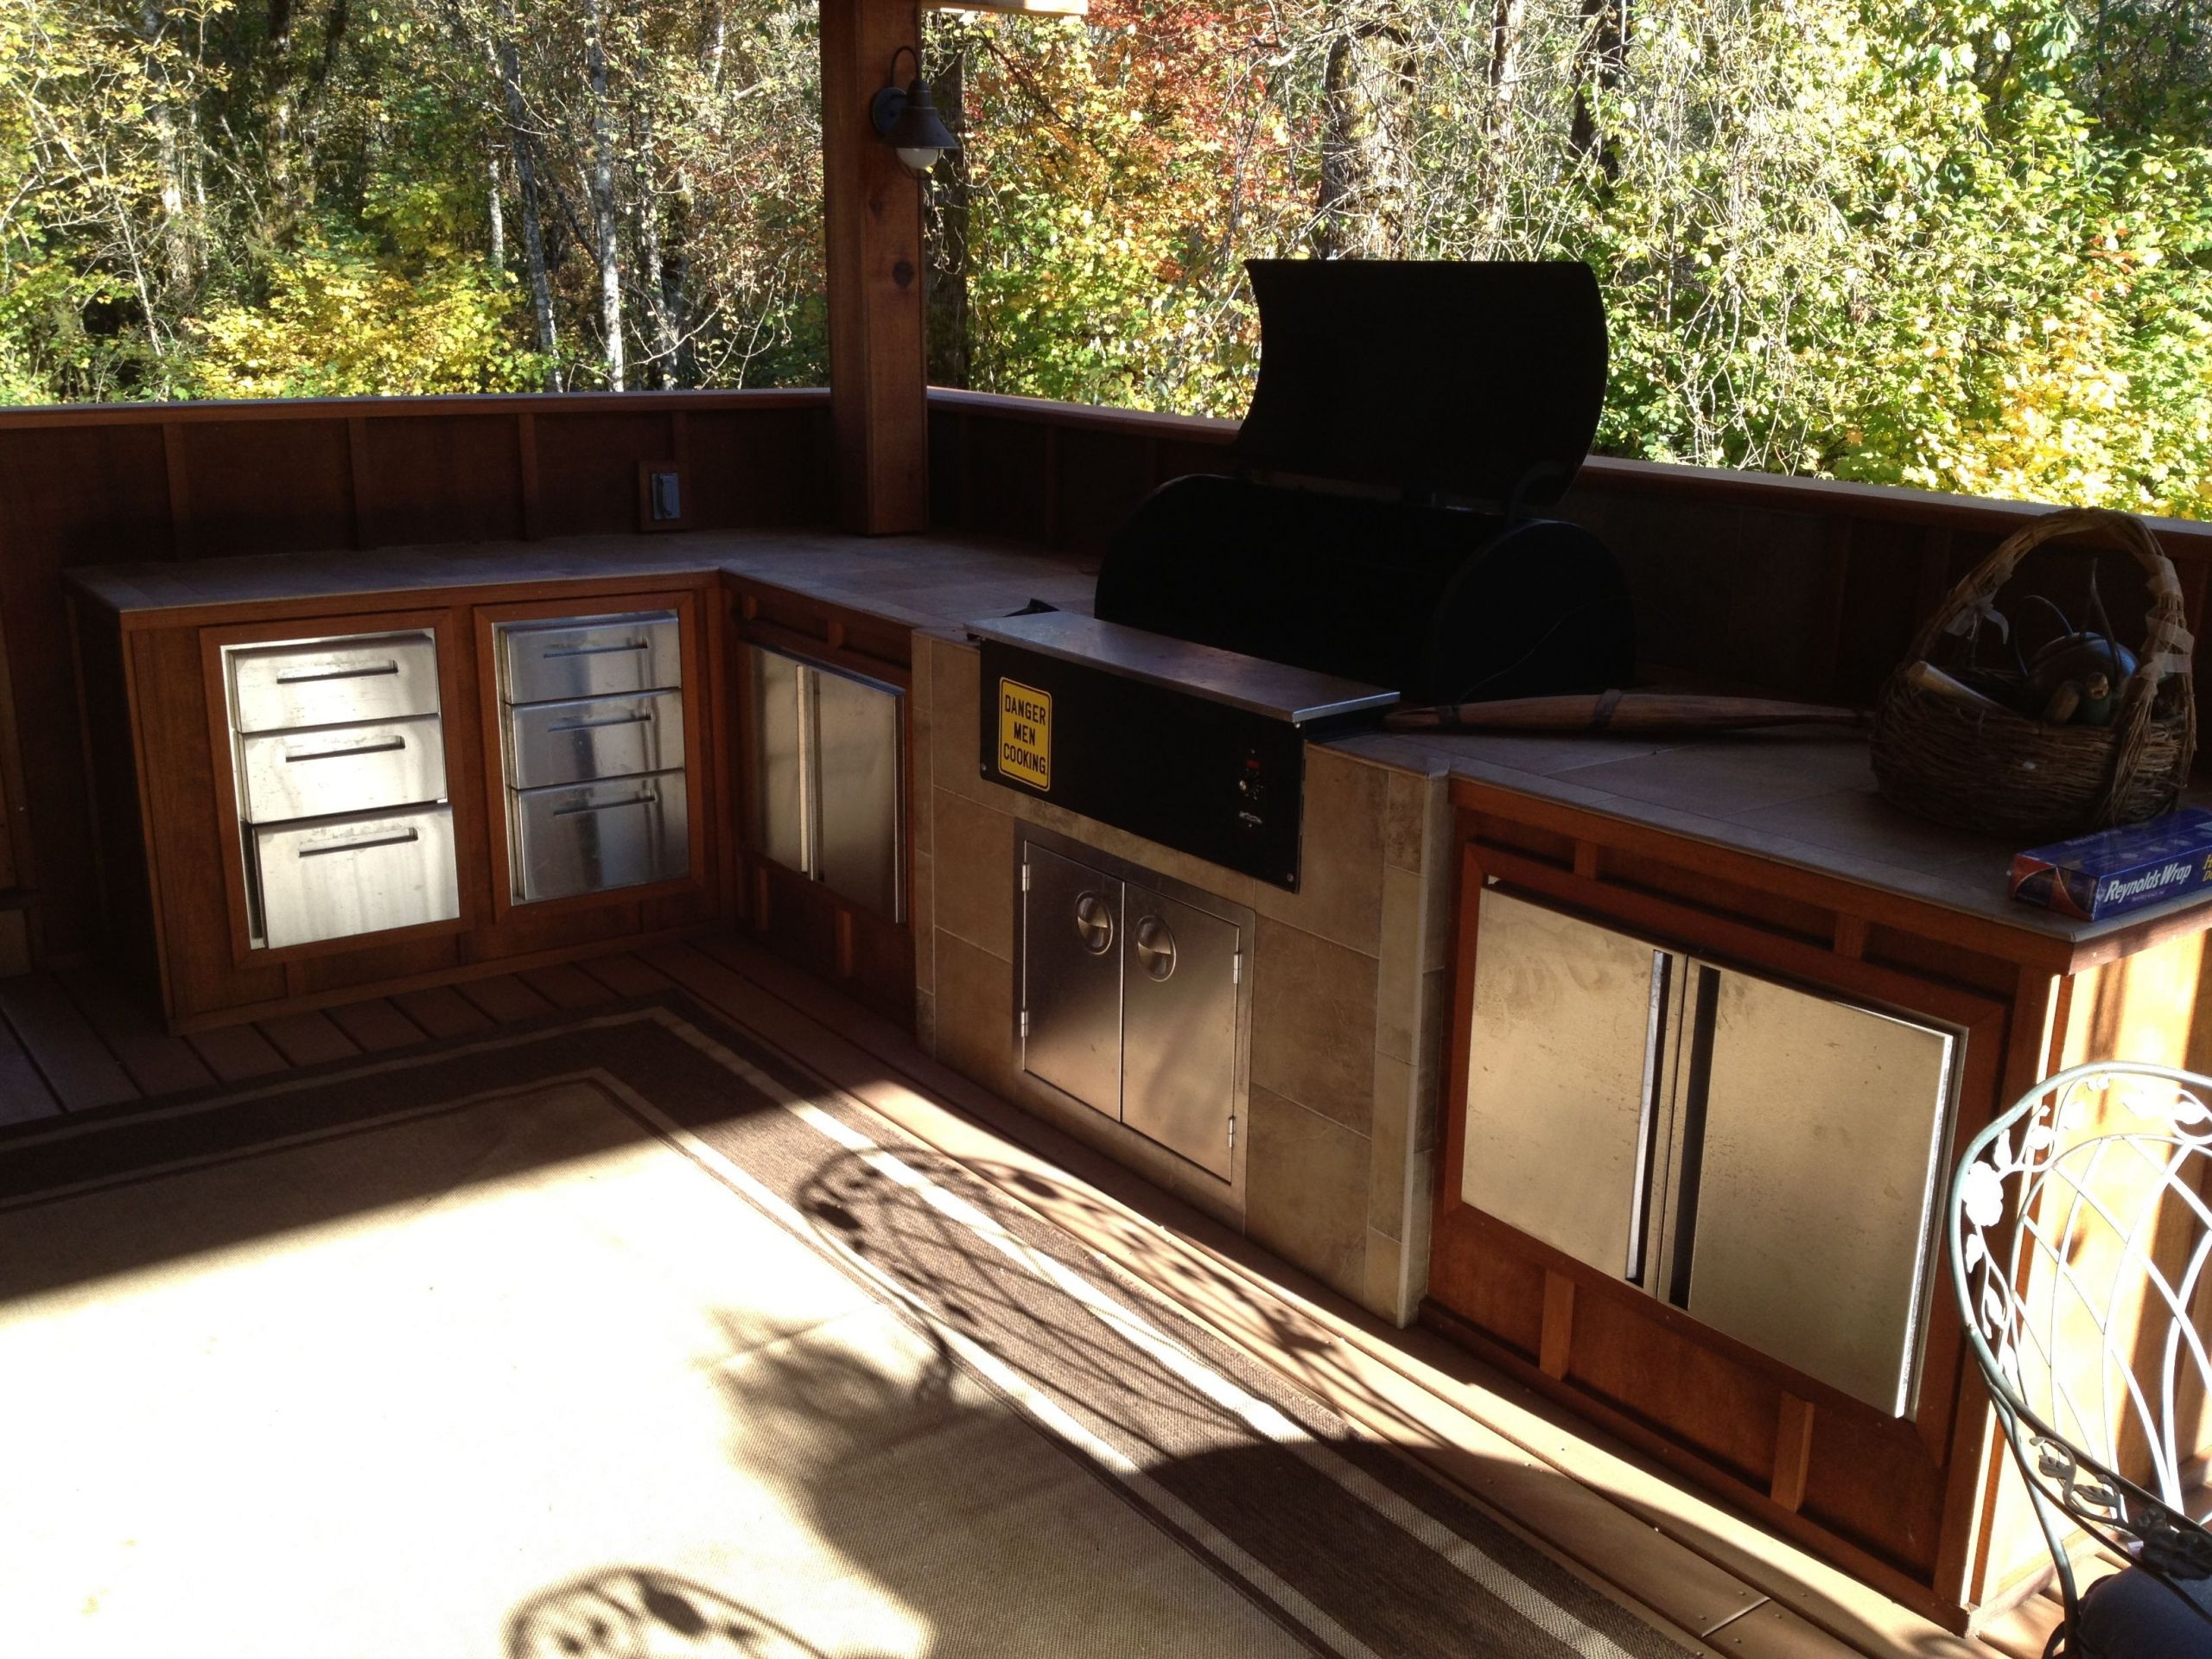 Traeger Built In Outdoor Kitchen
 Outdoor kitchen with built in Traeger